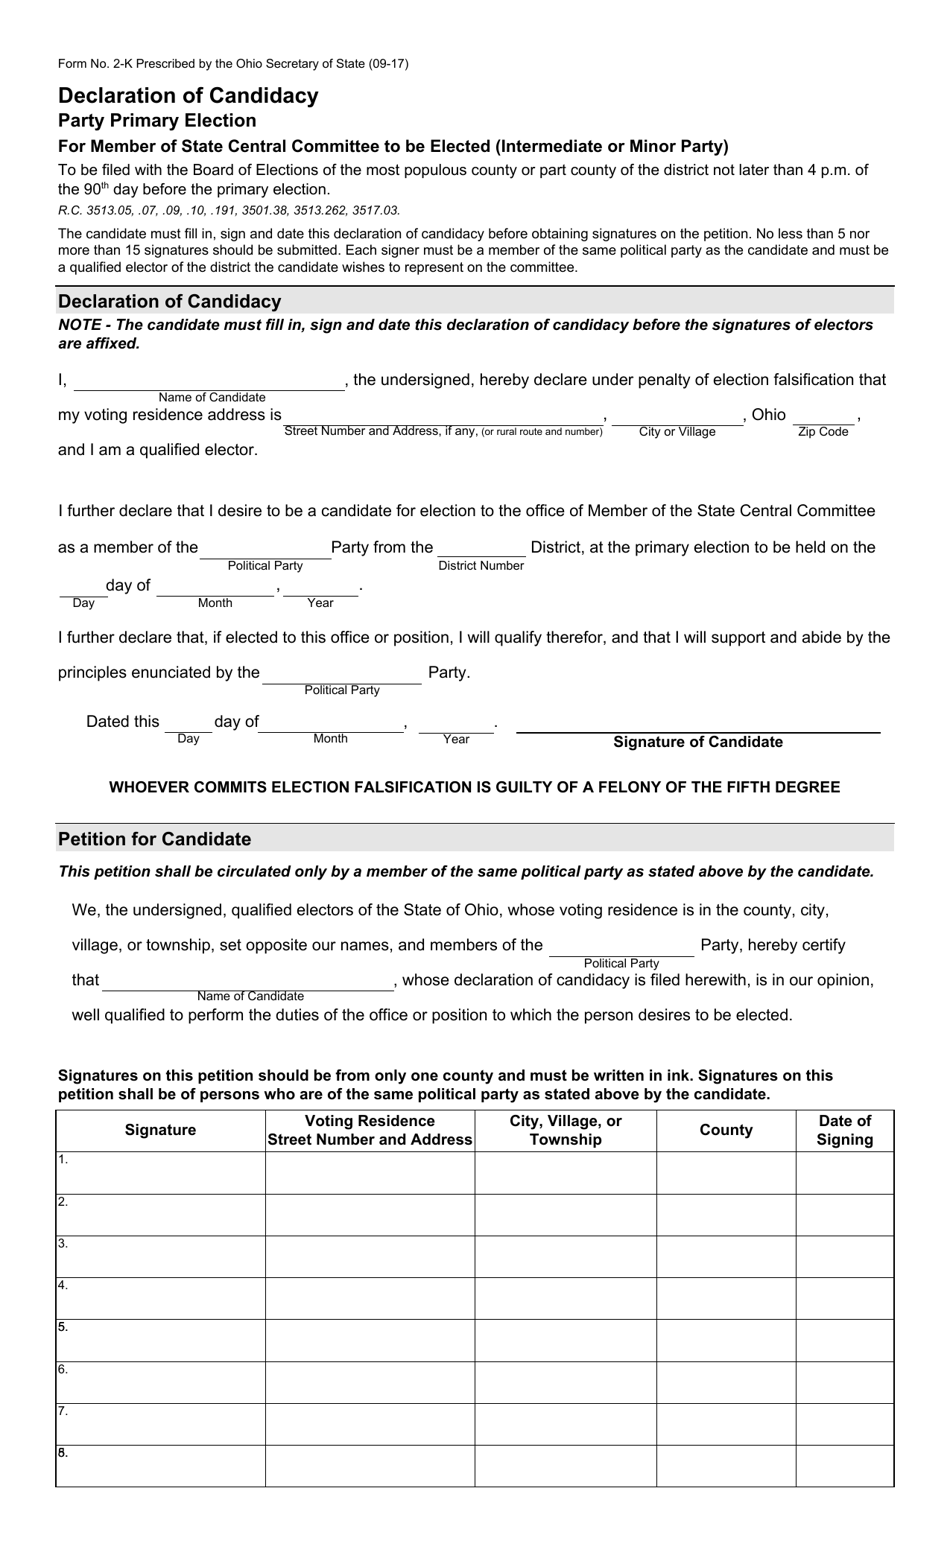 Form 2-K Declaration of Candidacy - State Central Committee to Be Elected at Party Primary Election (Intermediate Party) - Ohio, Page 1